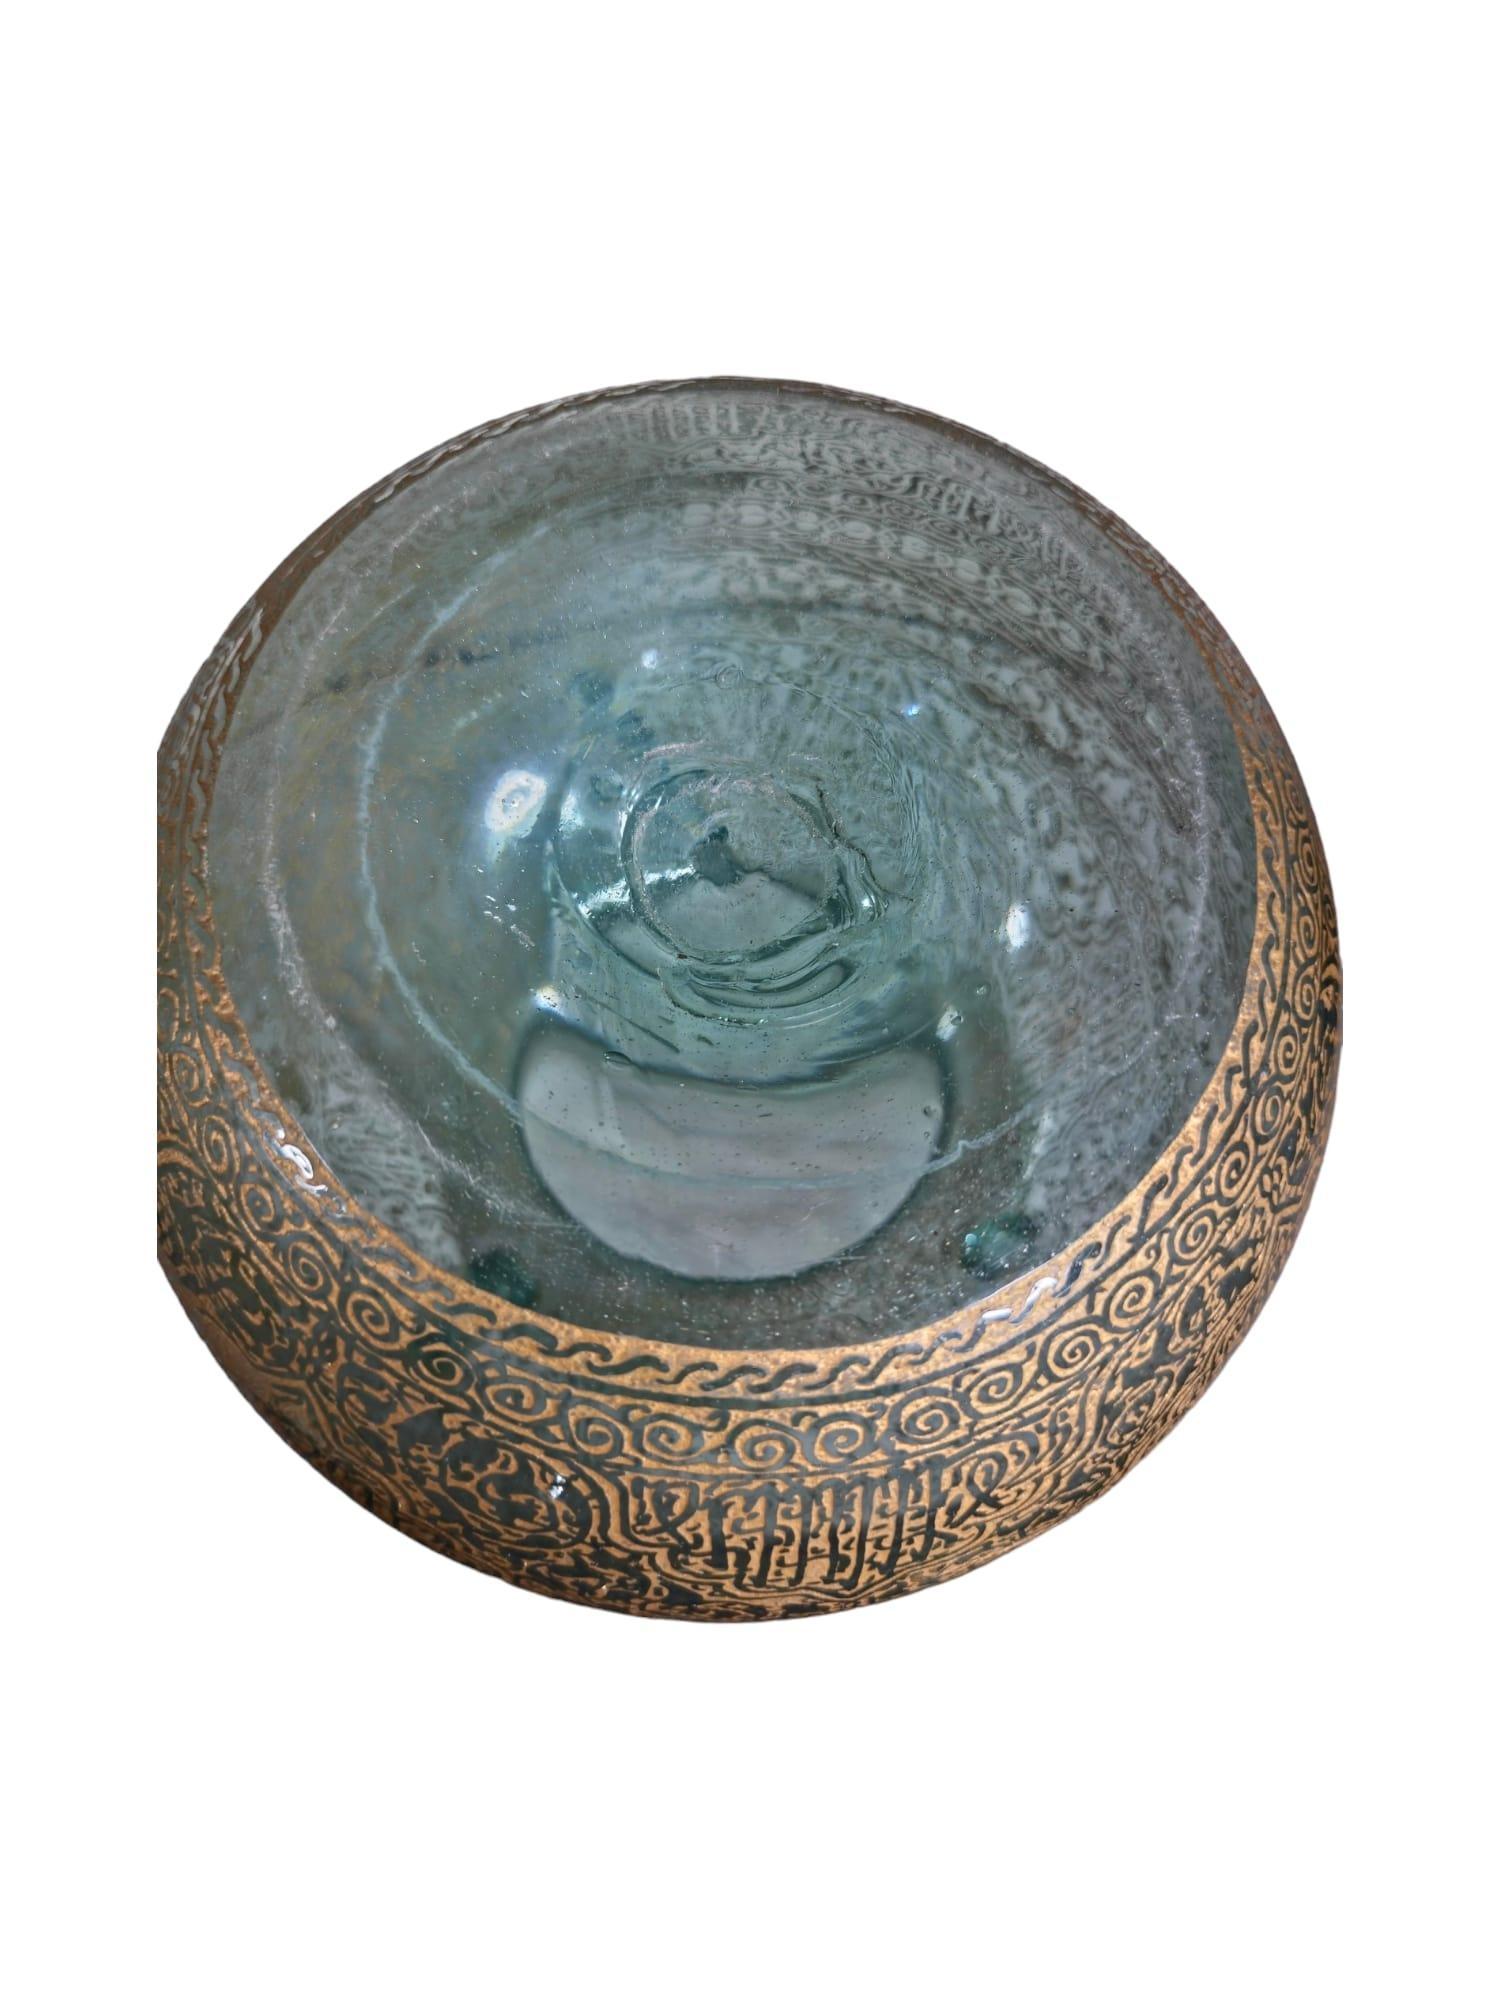 Handblown Mosque glass oil lamp in Mameluke style gilded with Arabic Cursive Calligraphy
Middle Eastern Mosque lamp in the Islamic tradition, Moorish style etched blown clear glass with gilded calligraphic inscriptions.
Dimensions: 35 cm high and25